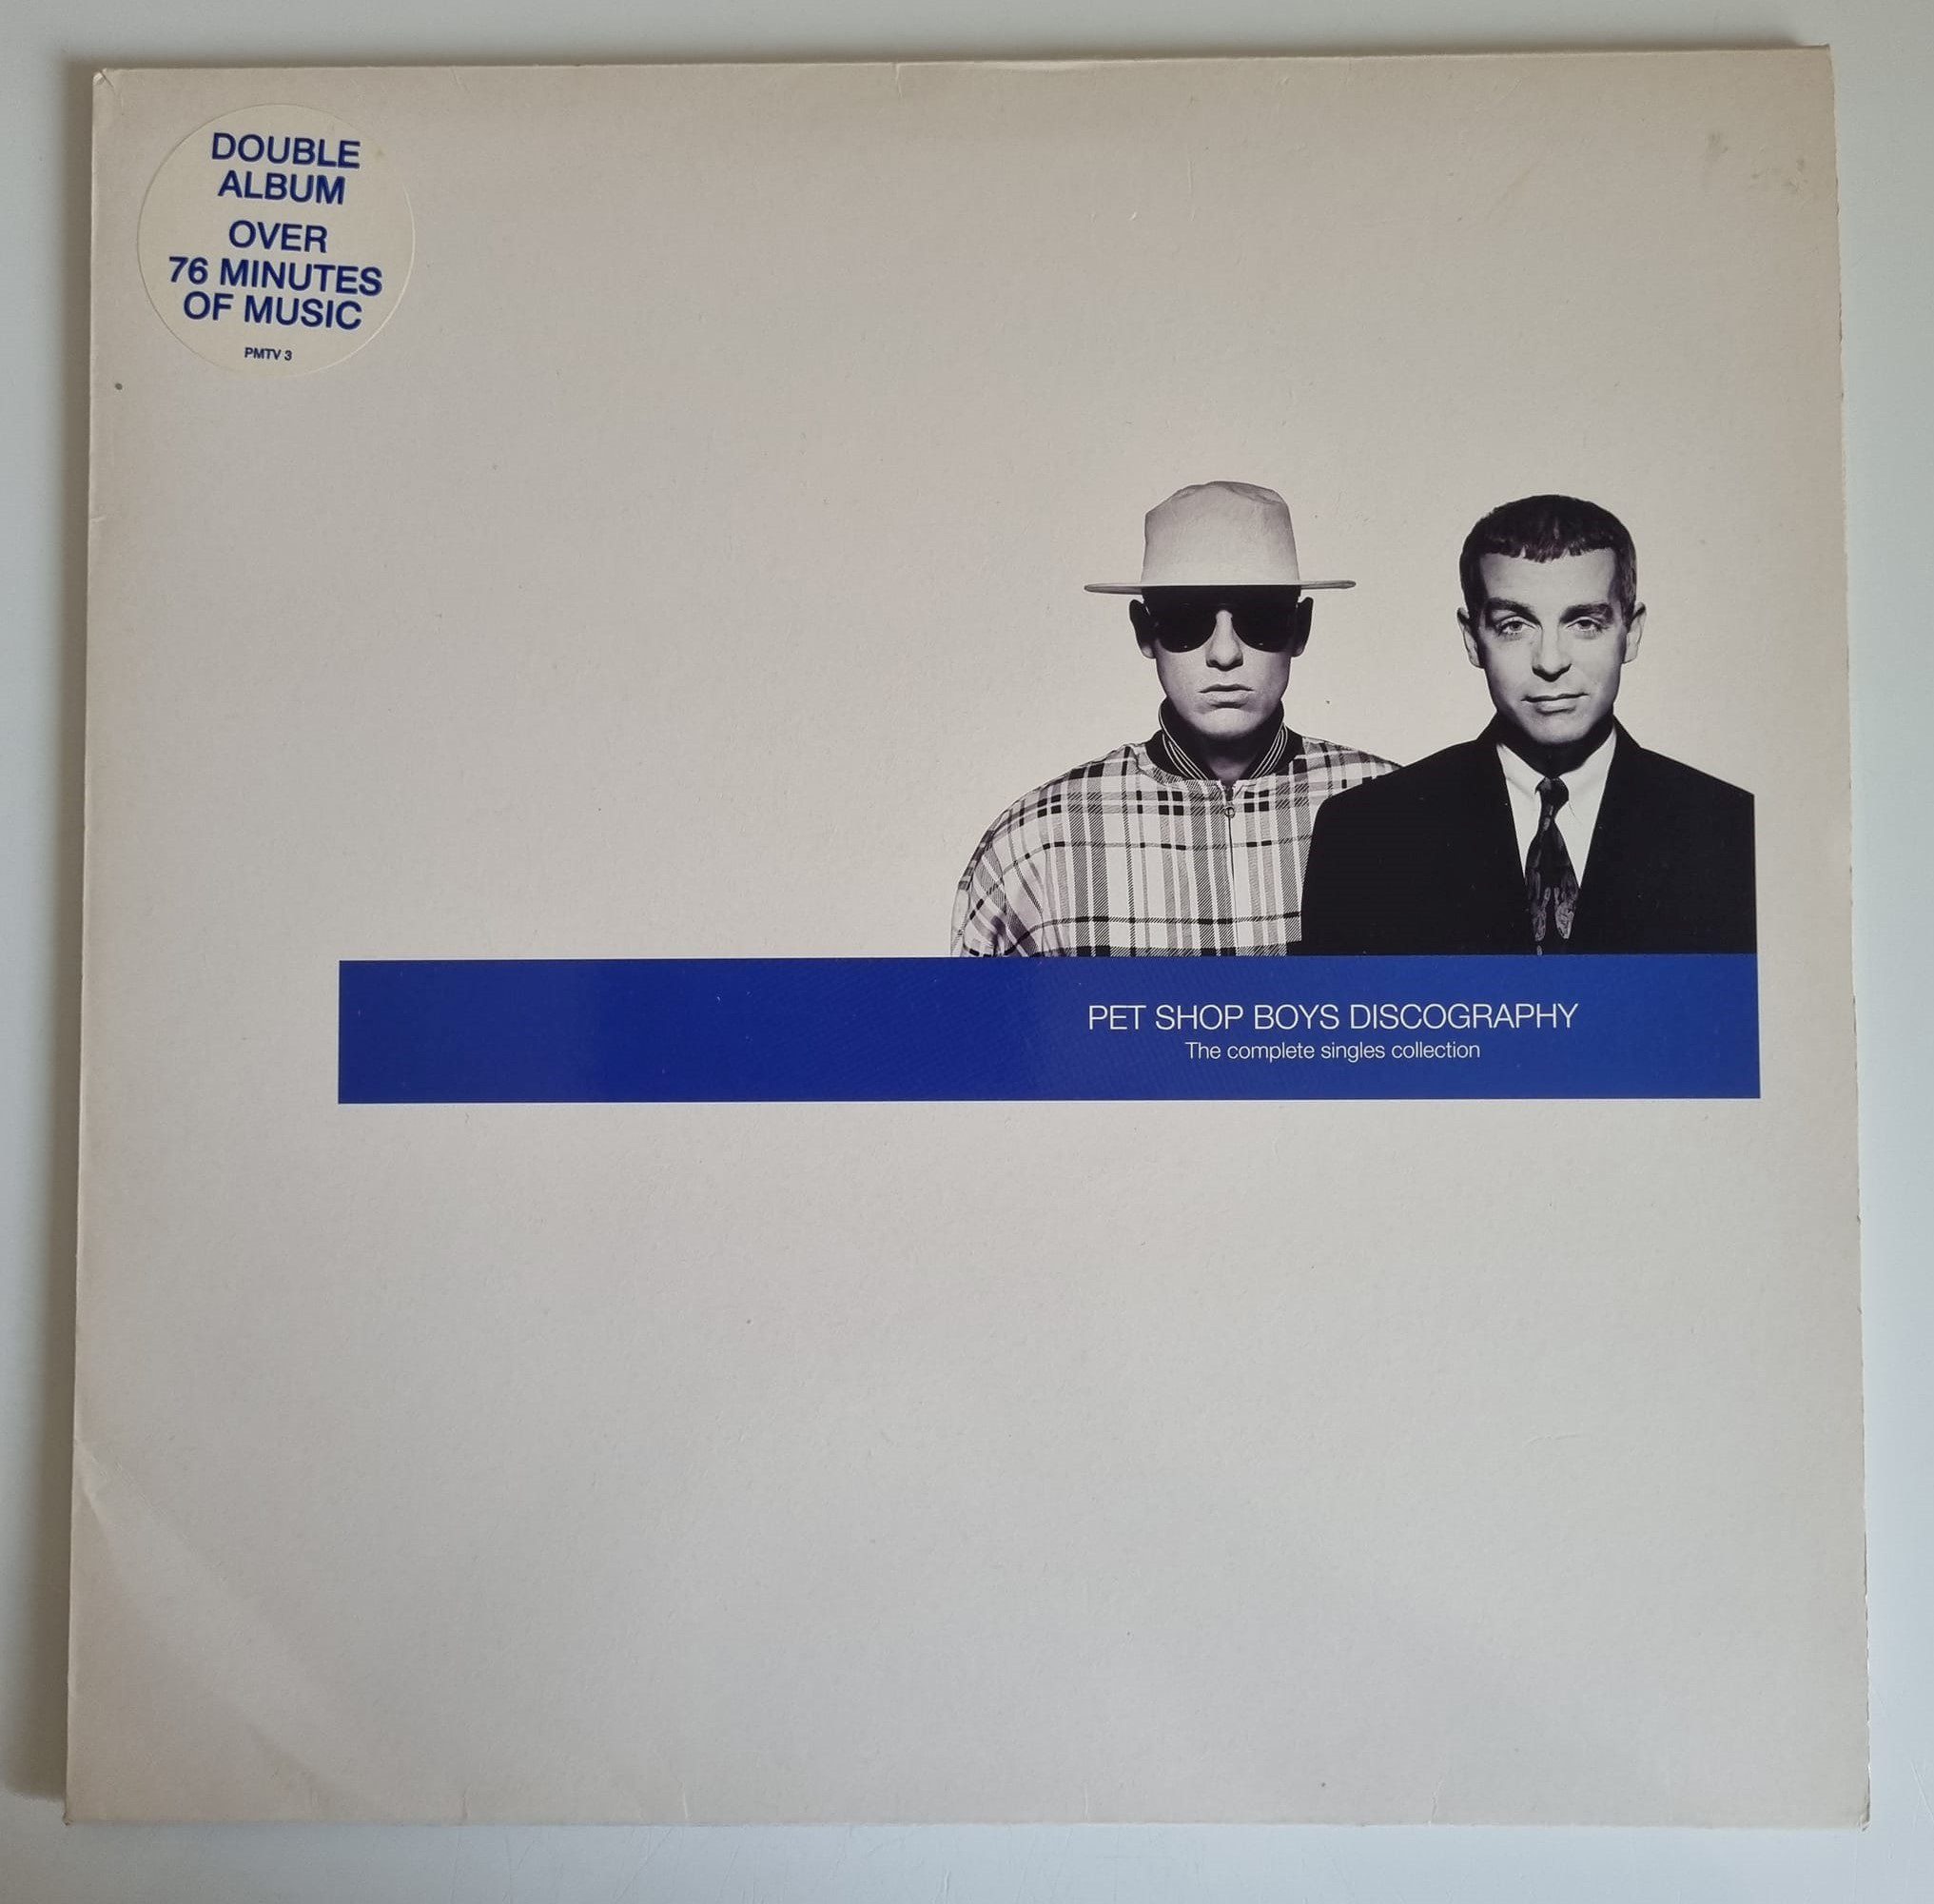 Buy this rare Pet Shop Boys record by clicking here